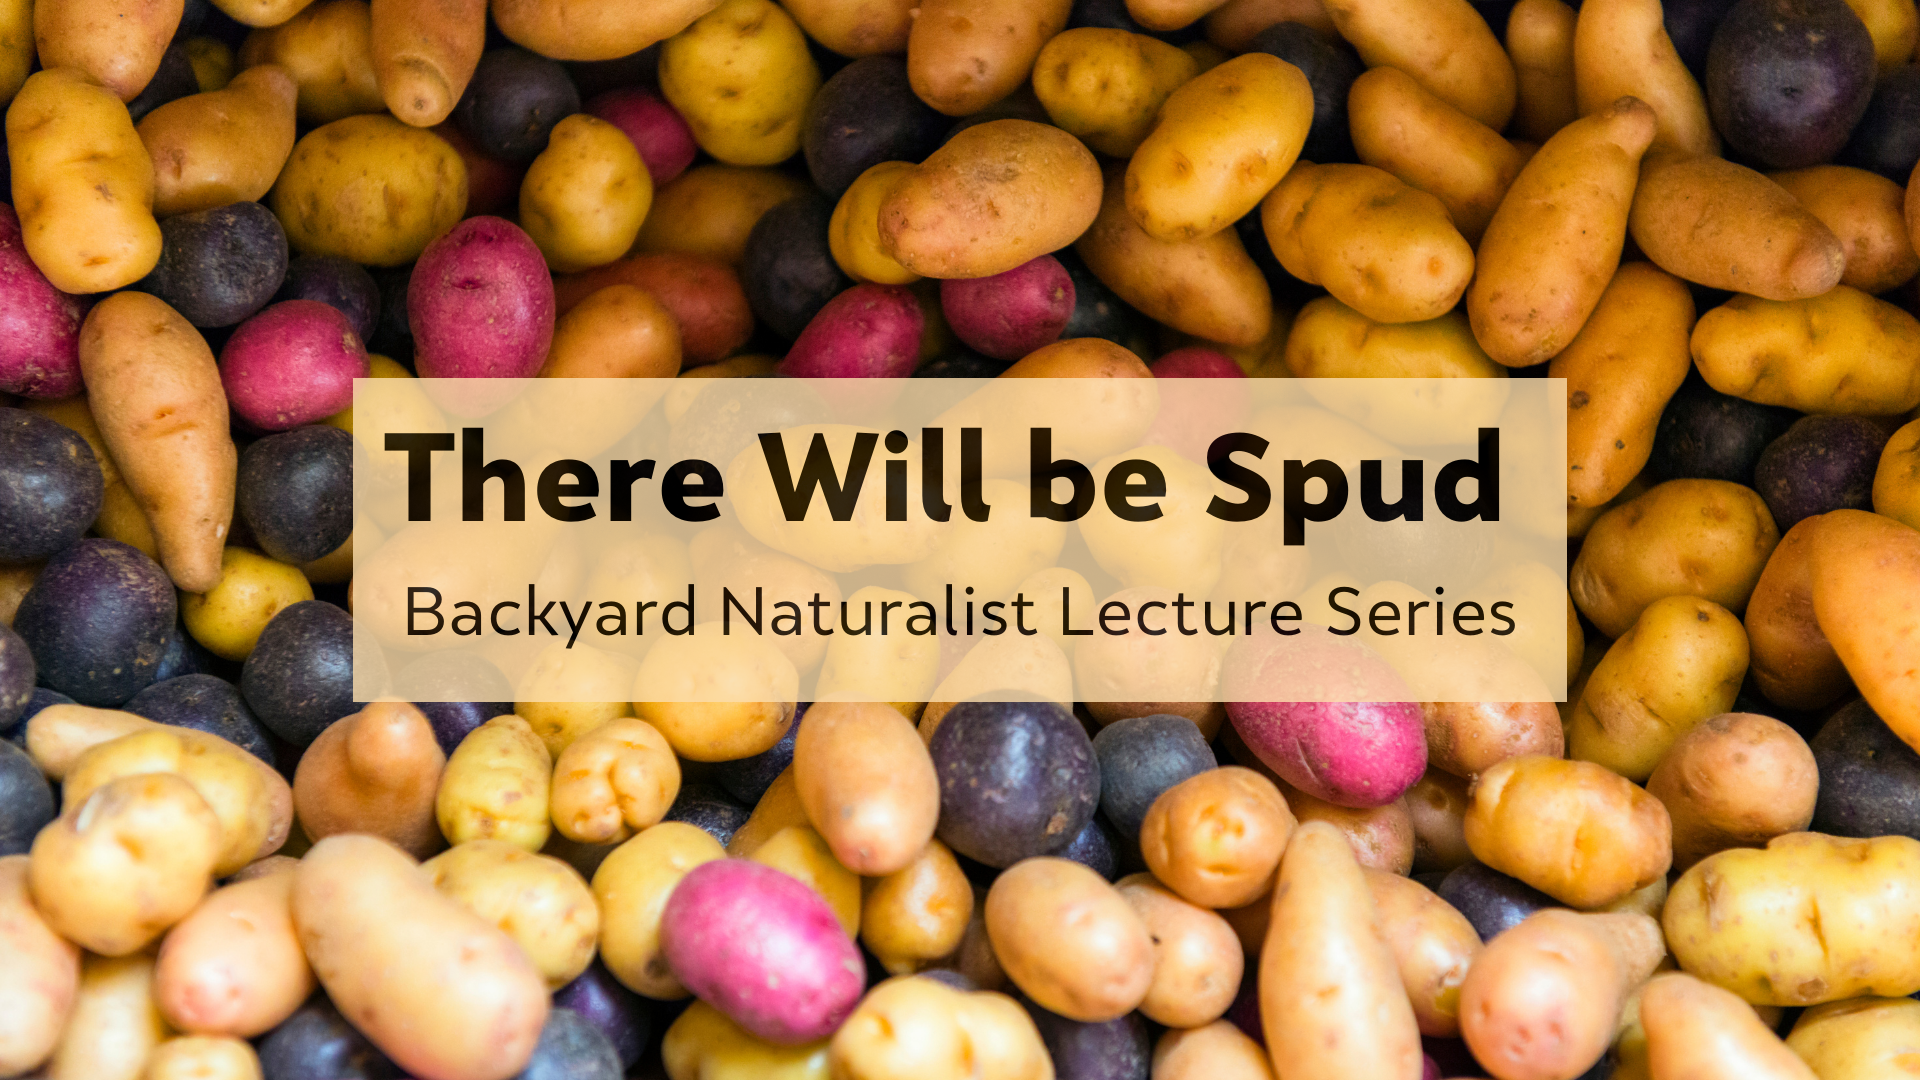 There Will be Spud - Backyard Naturalist Lecture Series